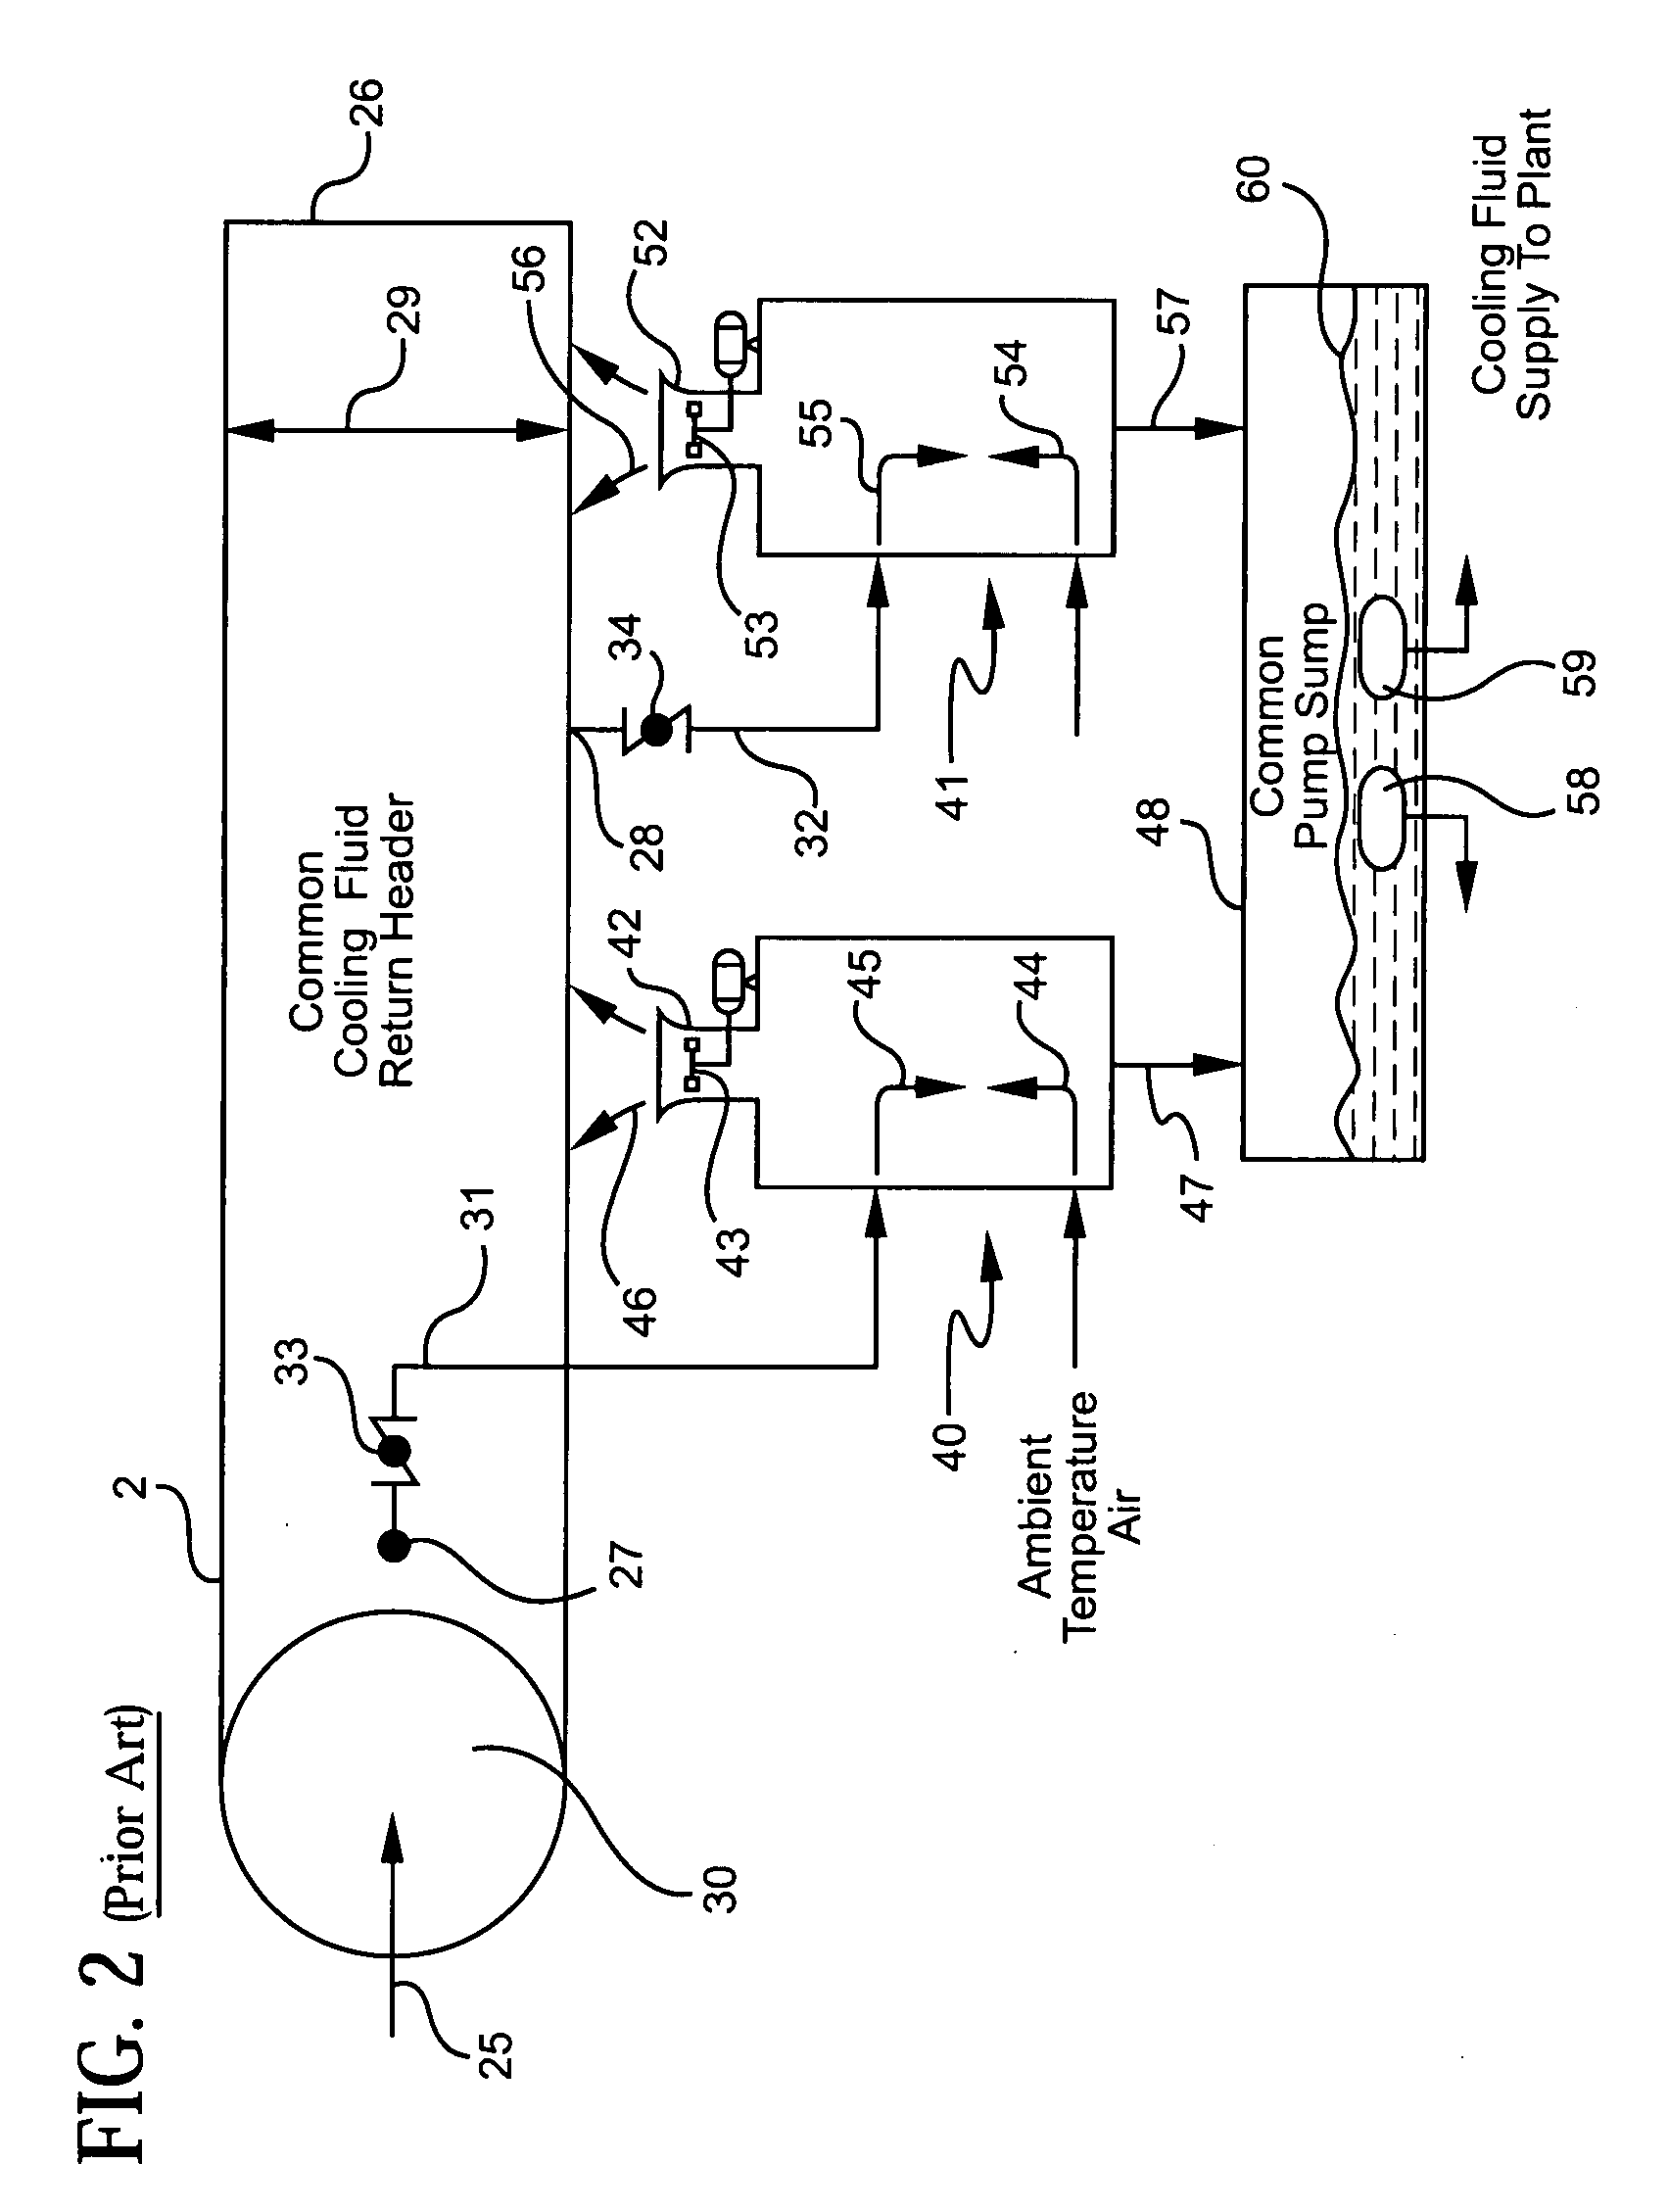 Method of operating a cooling fluid system